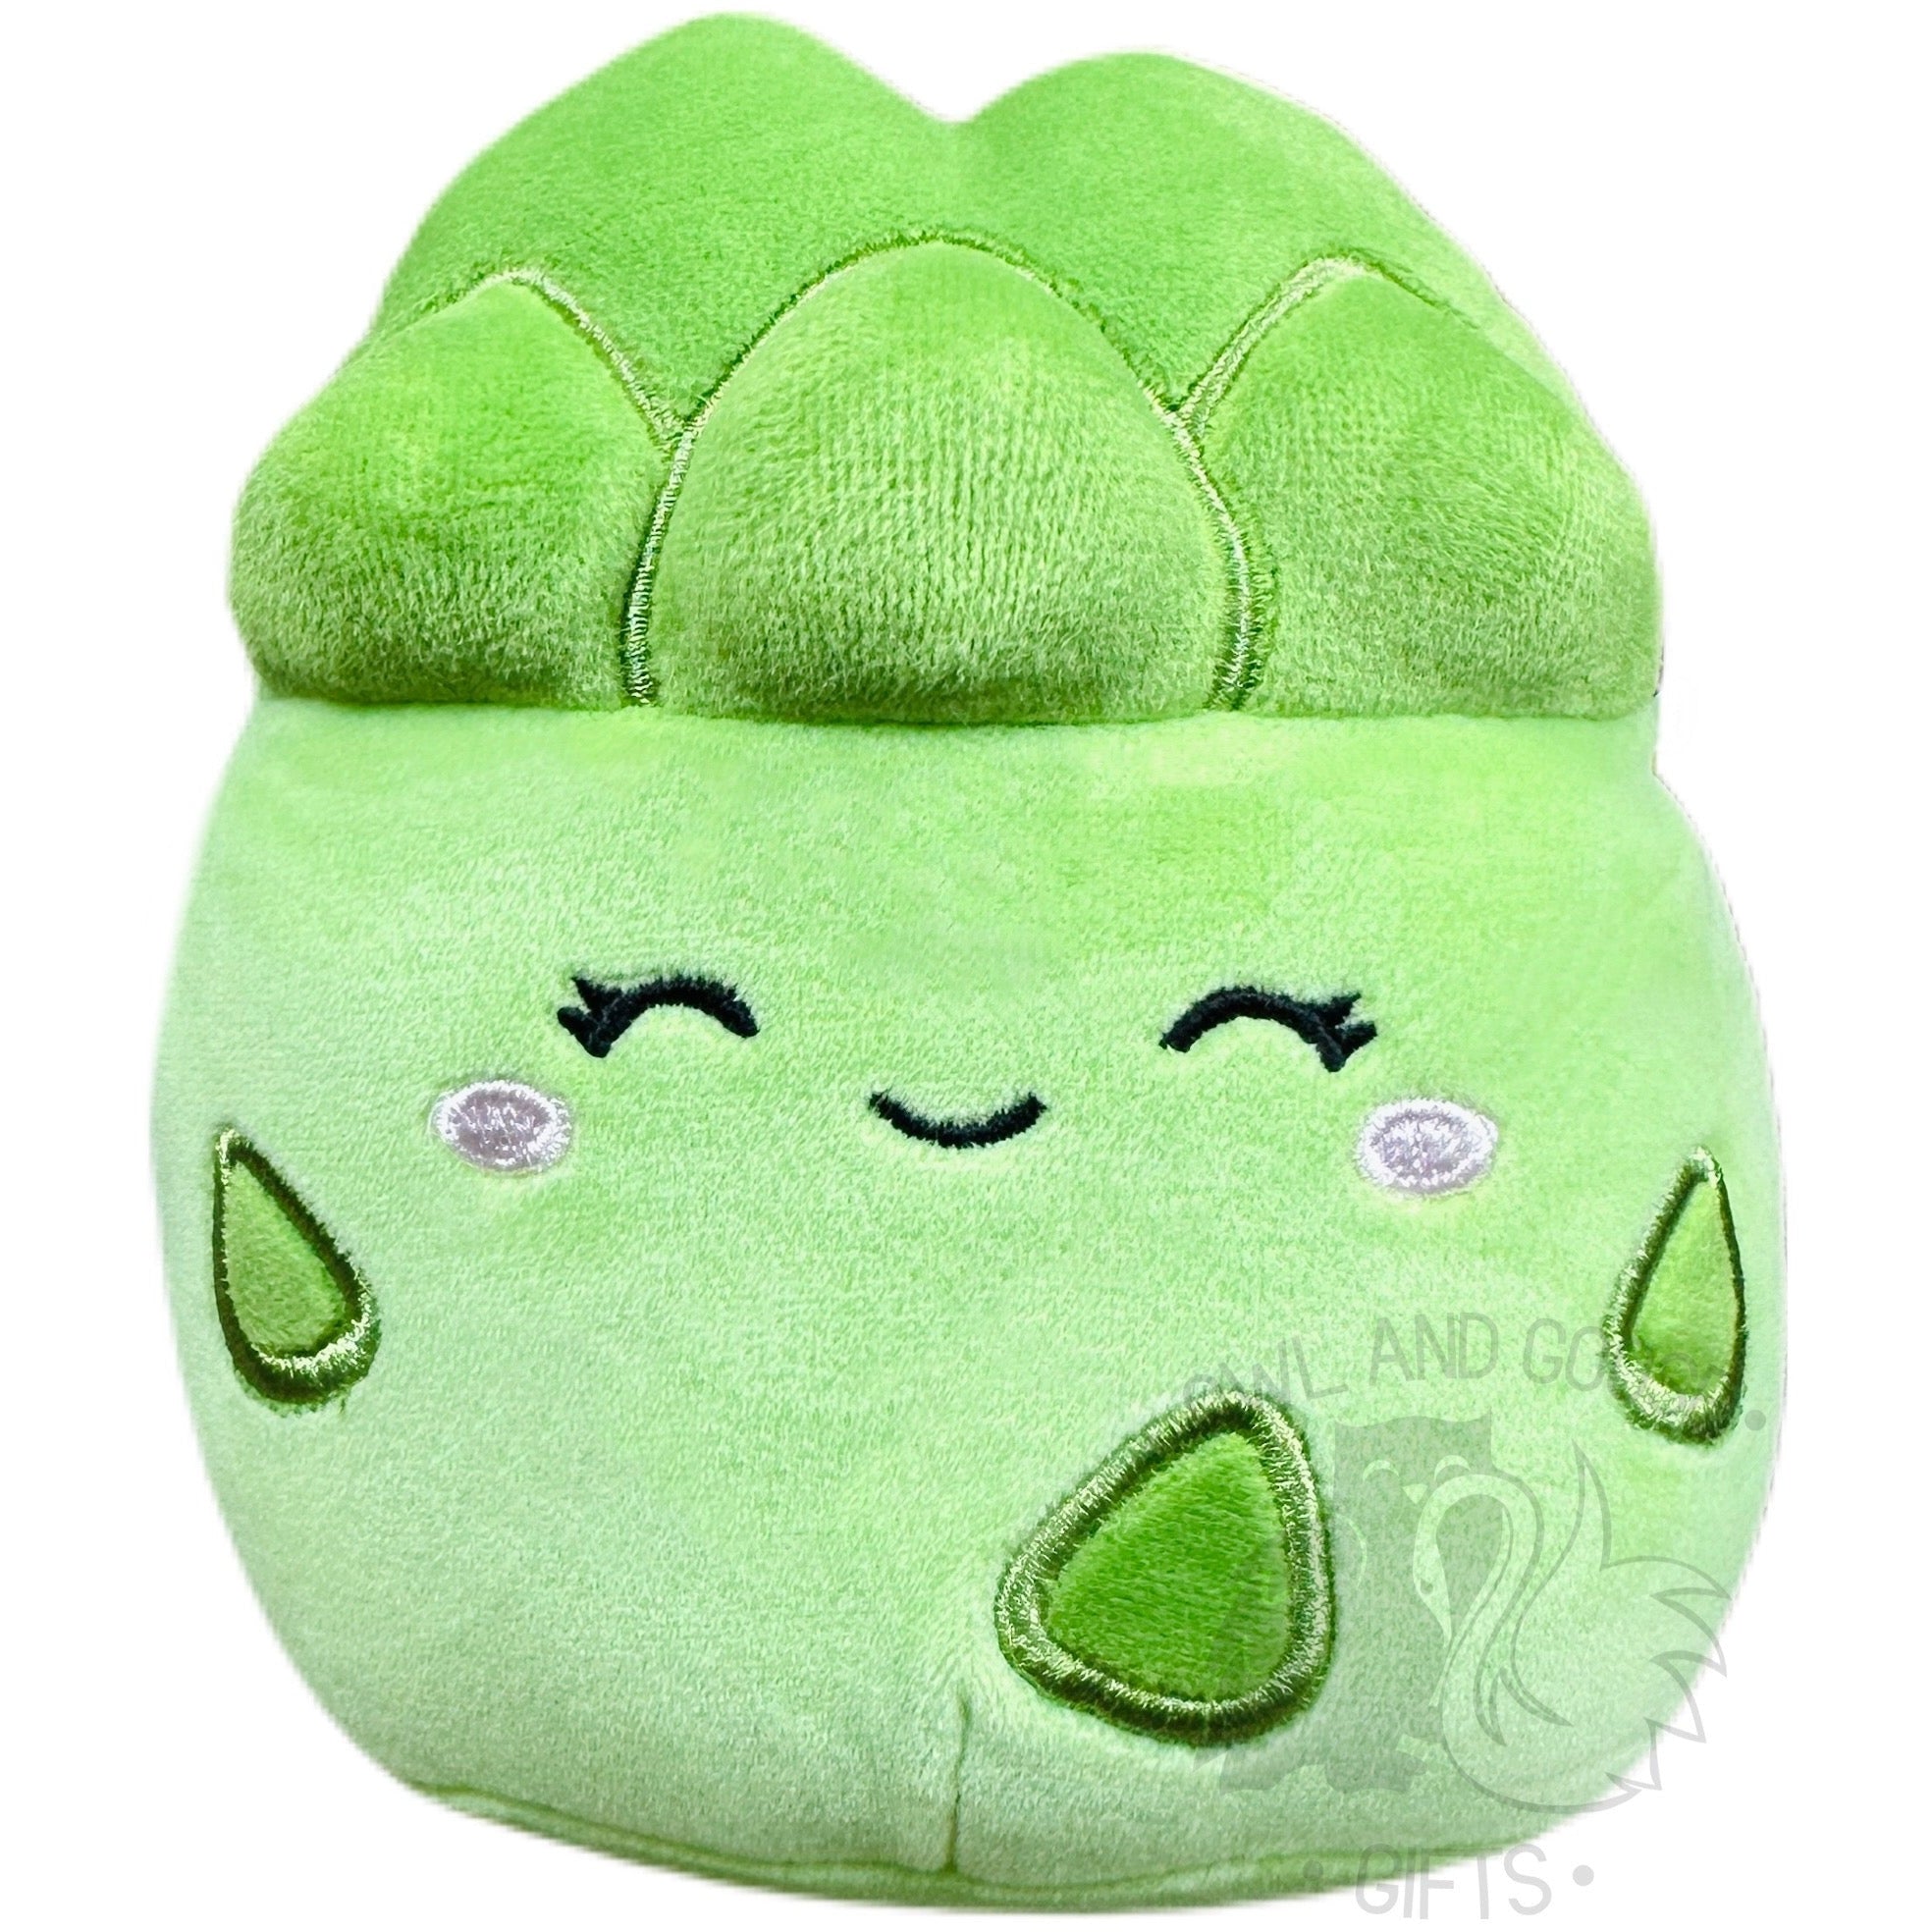 What on Earth is a Squishmallow?. Behold, the stuffed animal that